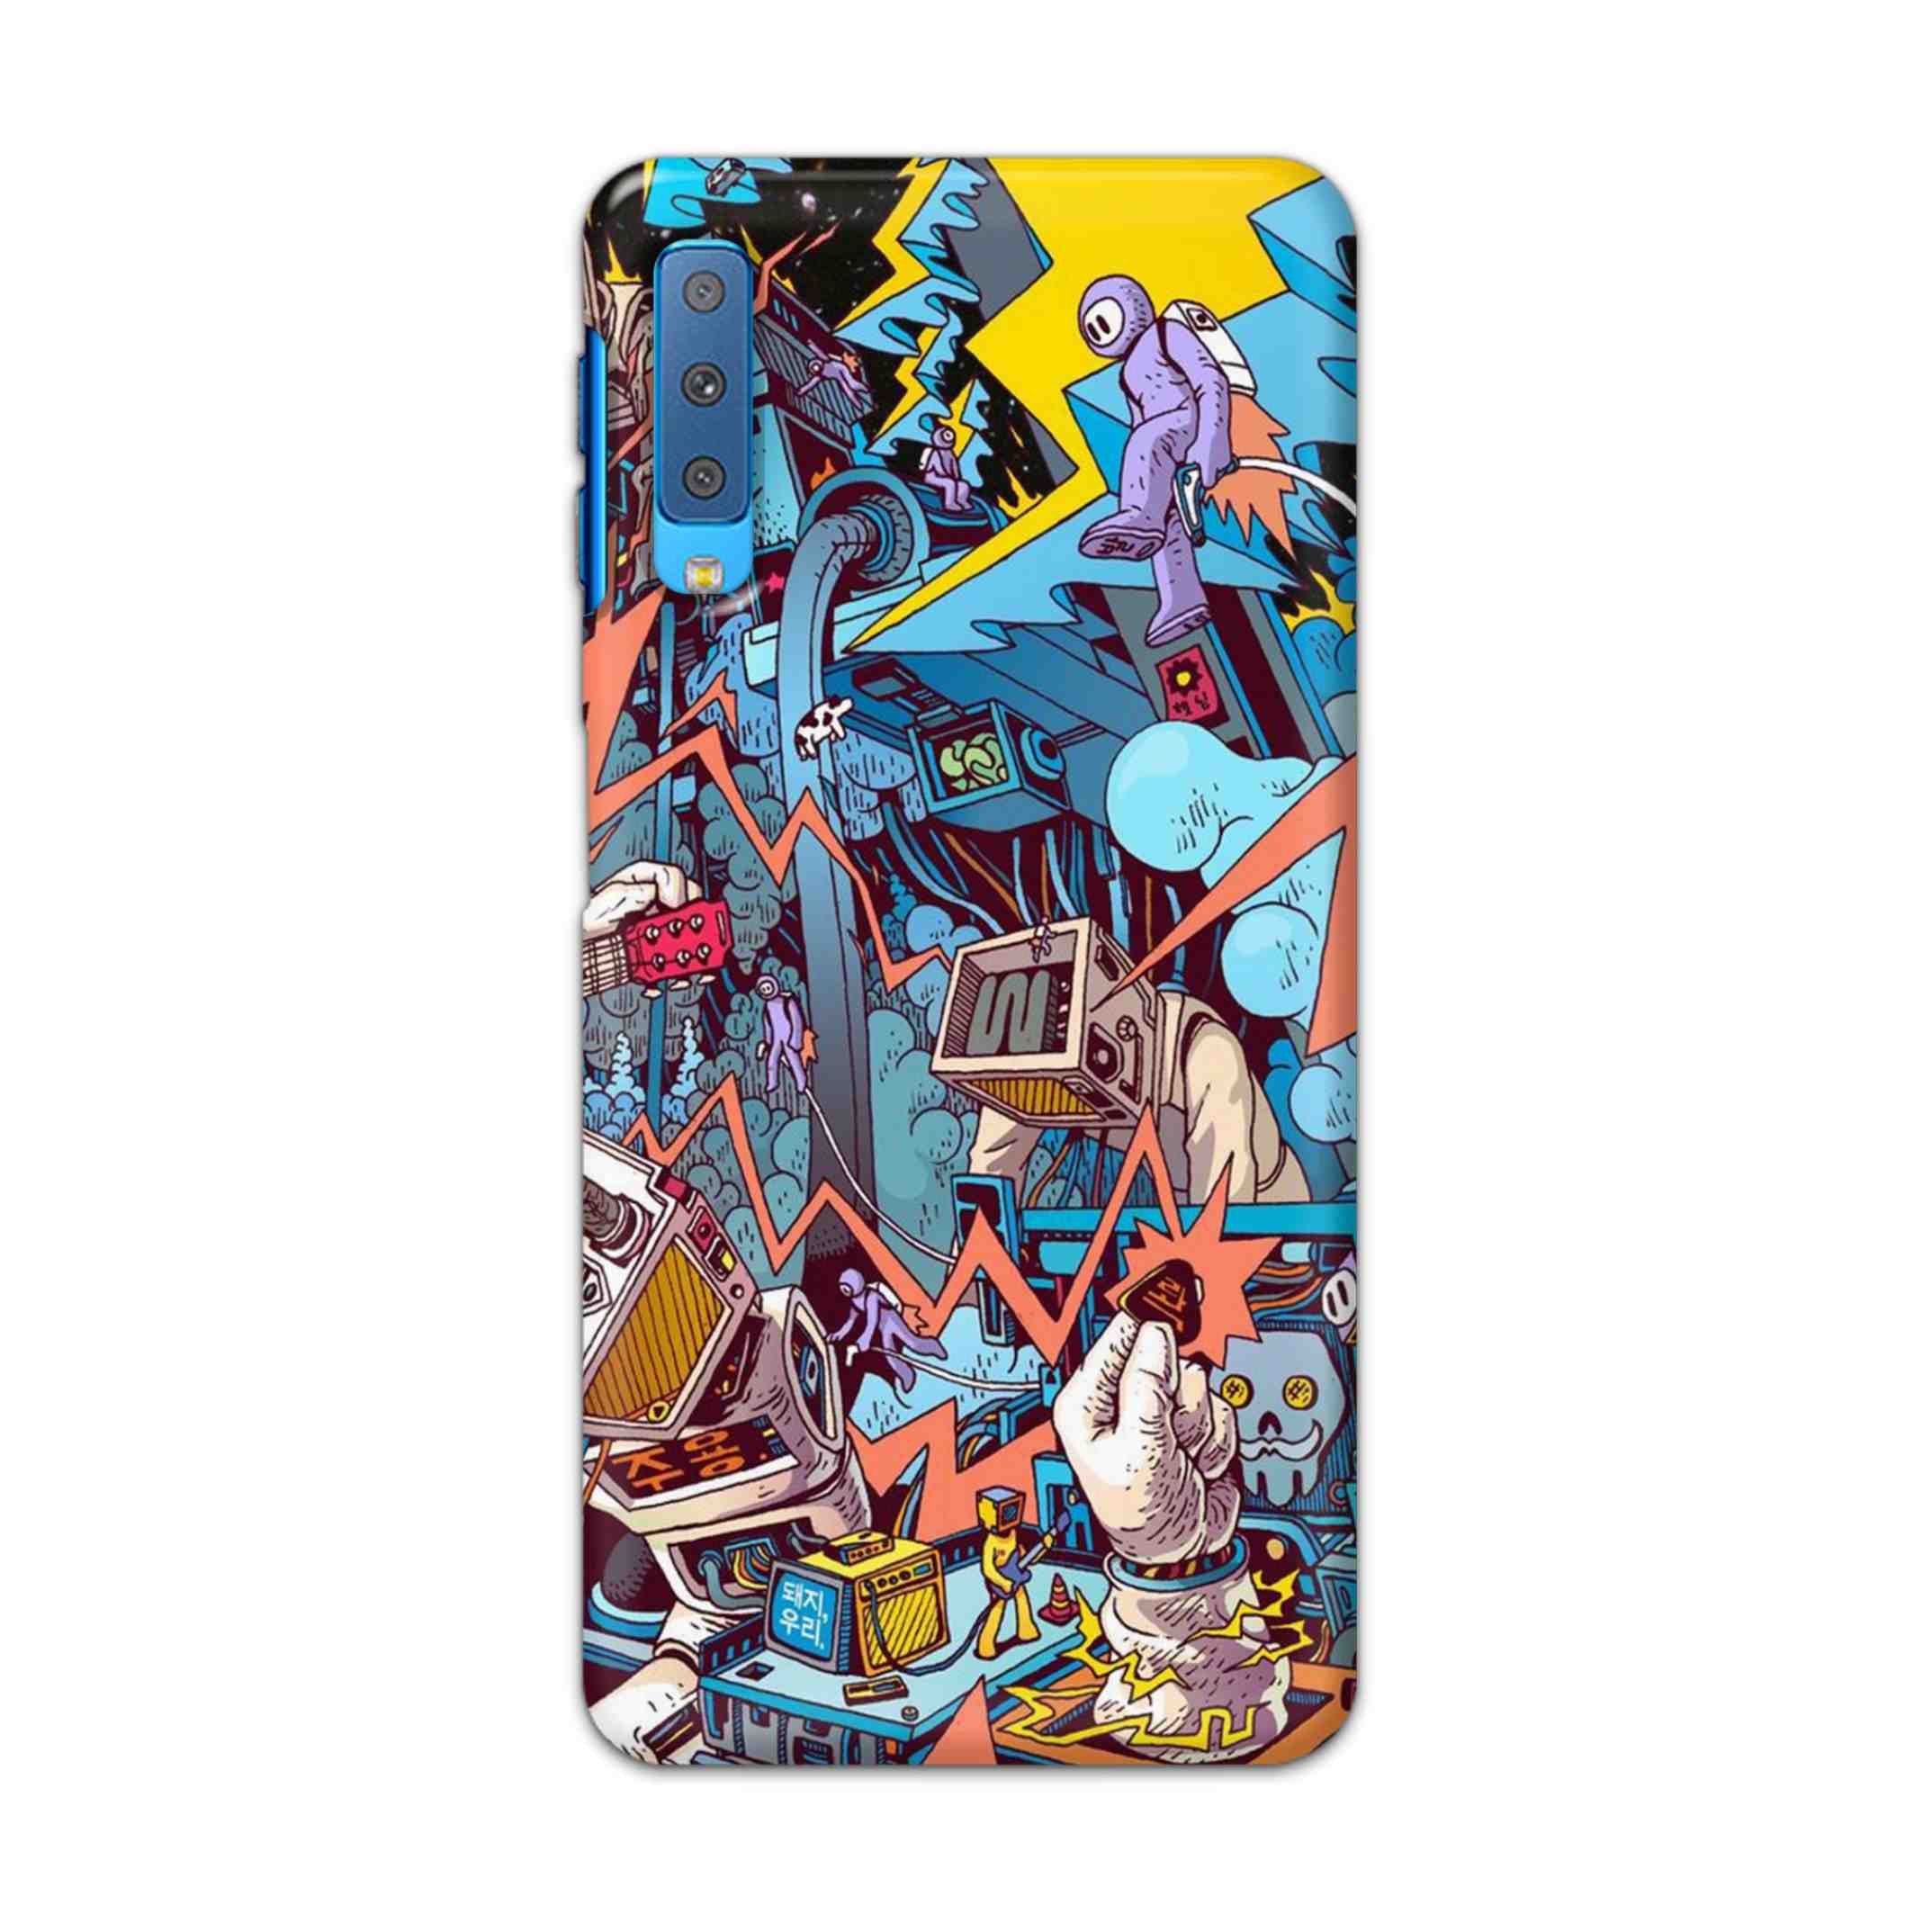 Buy Ofo Panic Hard Back Mobile Phone Case Cover For Samsung Galaxy A7 2018 Online